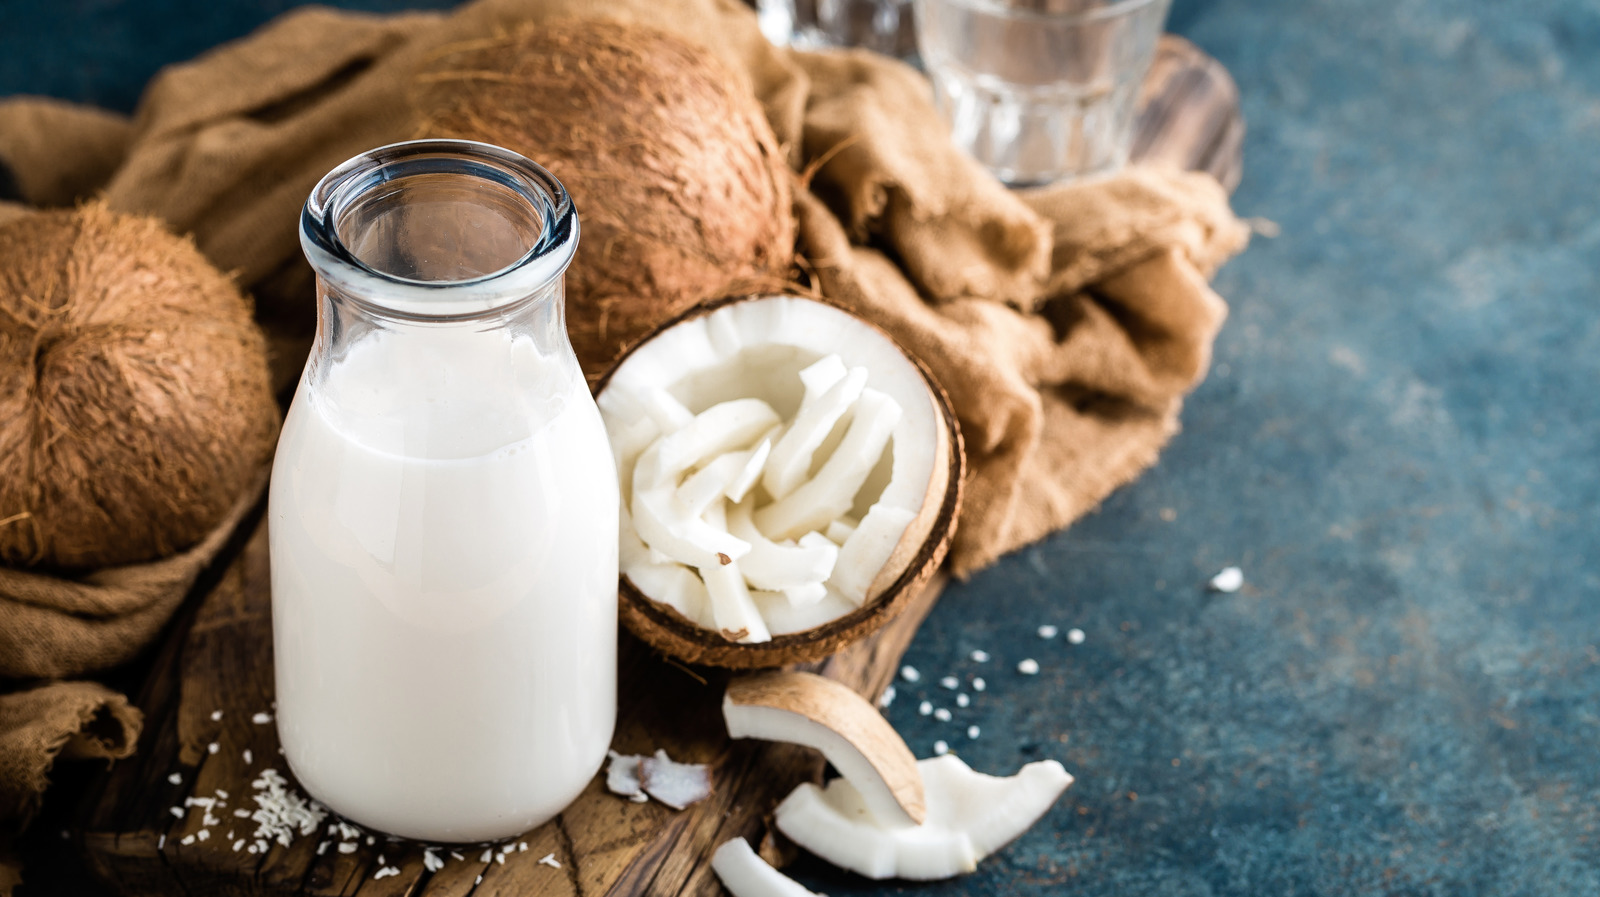 How Are Coconut Milk And Regular Milk Different?